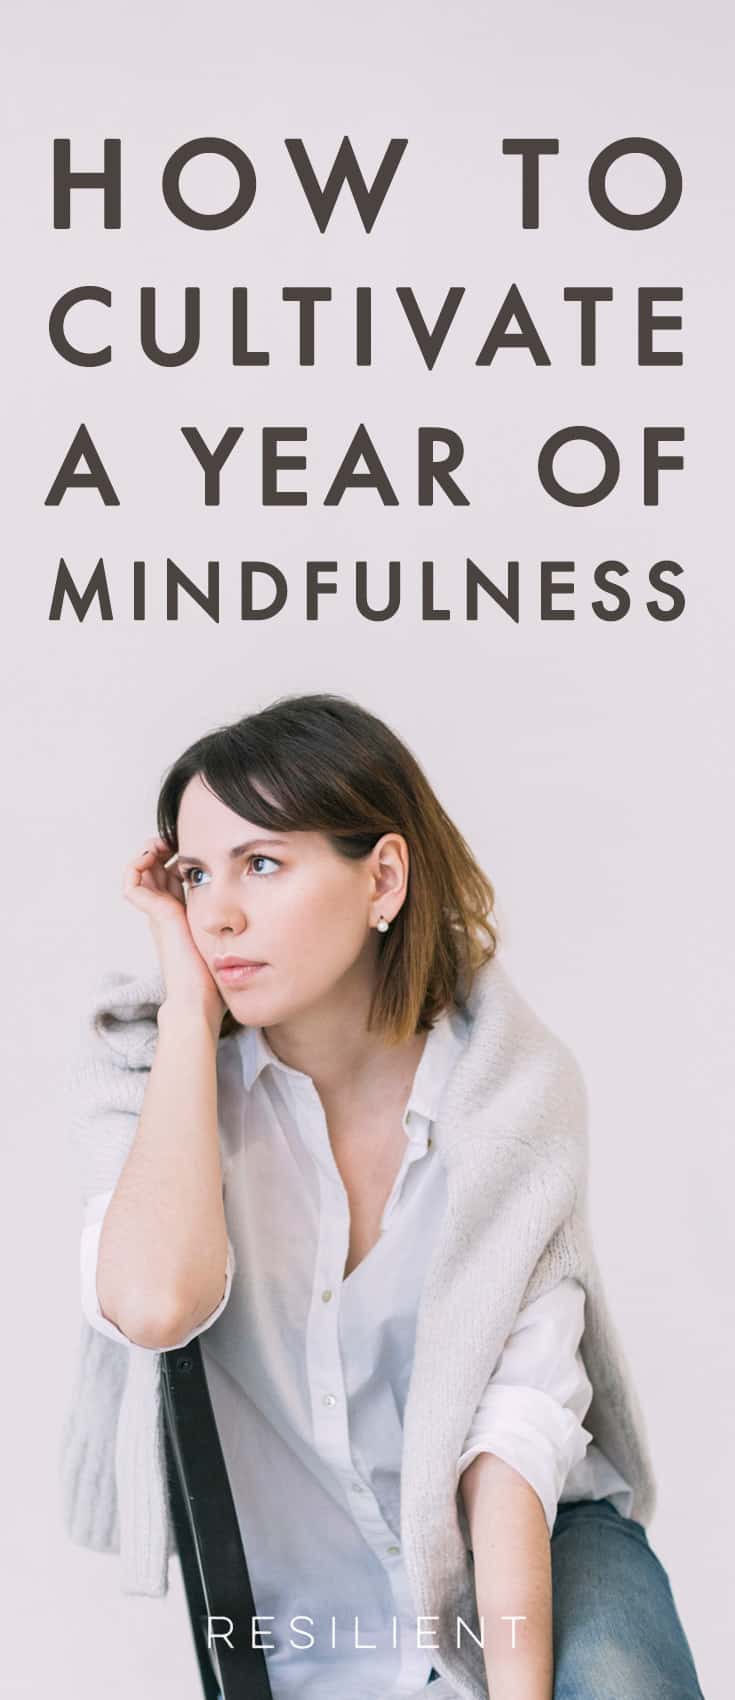 How to Cultivate a Year of Mindfulness